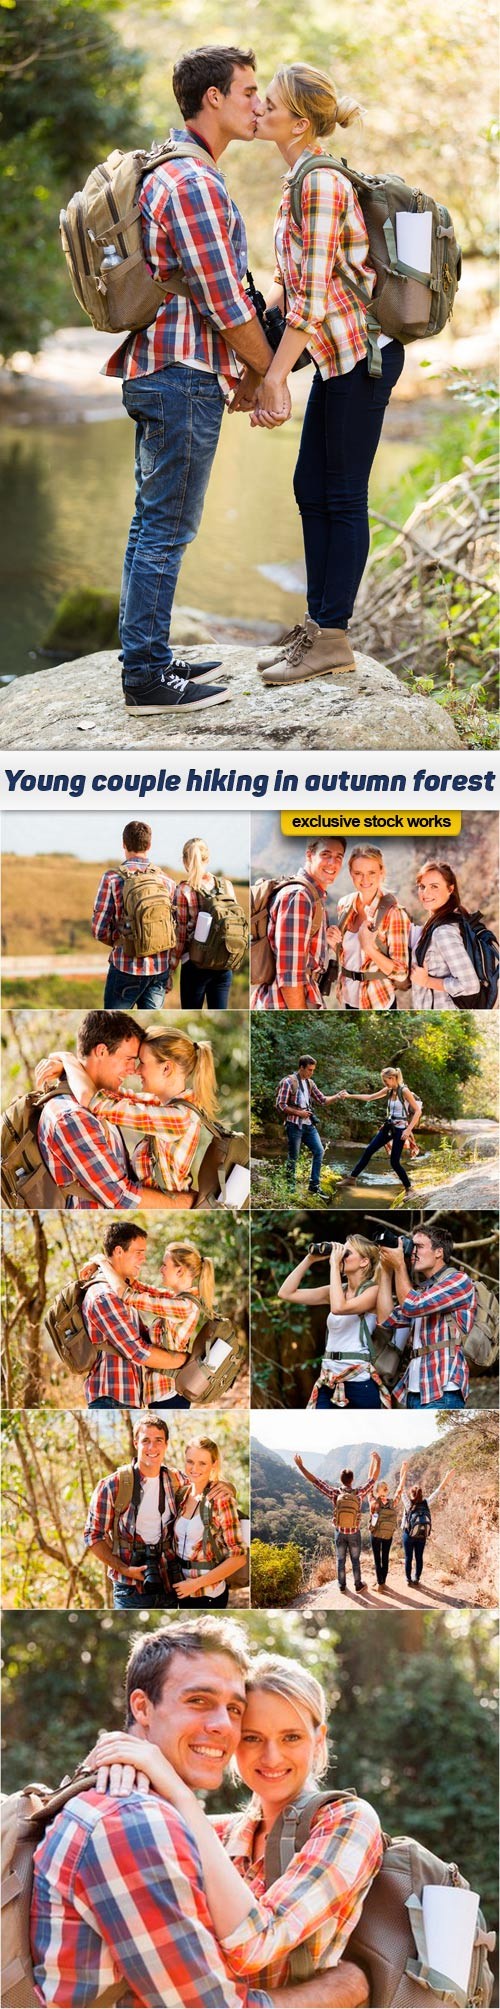 Young couple hiking in autumn forest - 10 UHQ JPEG